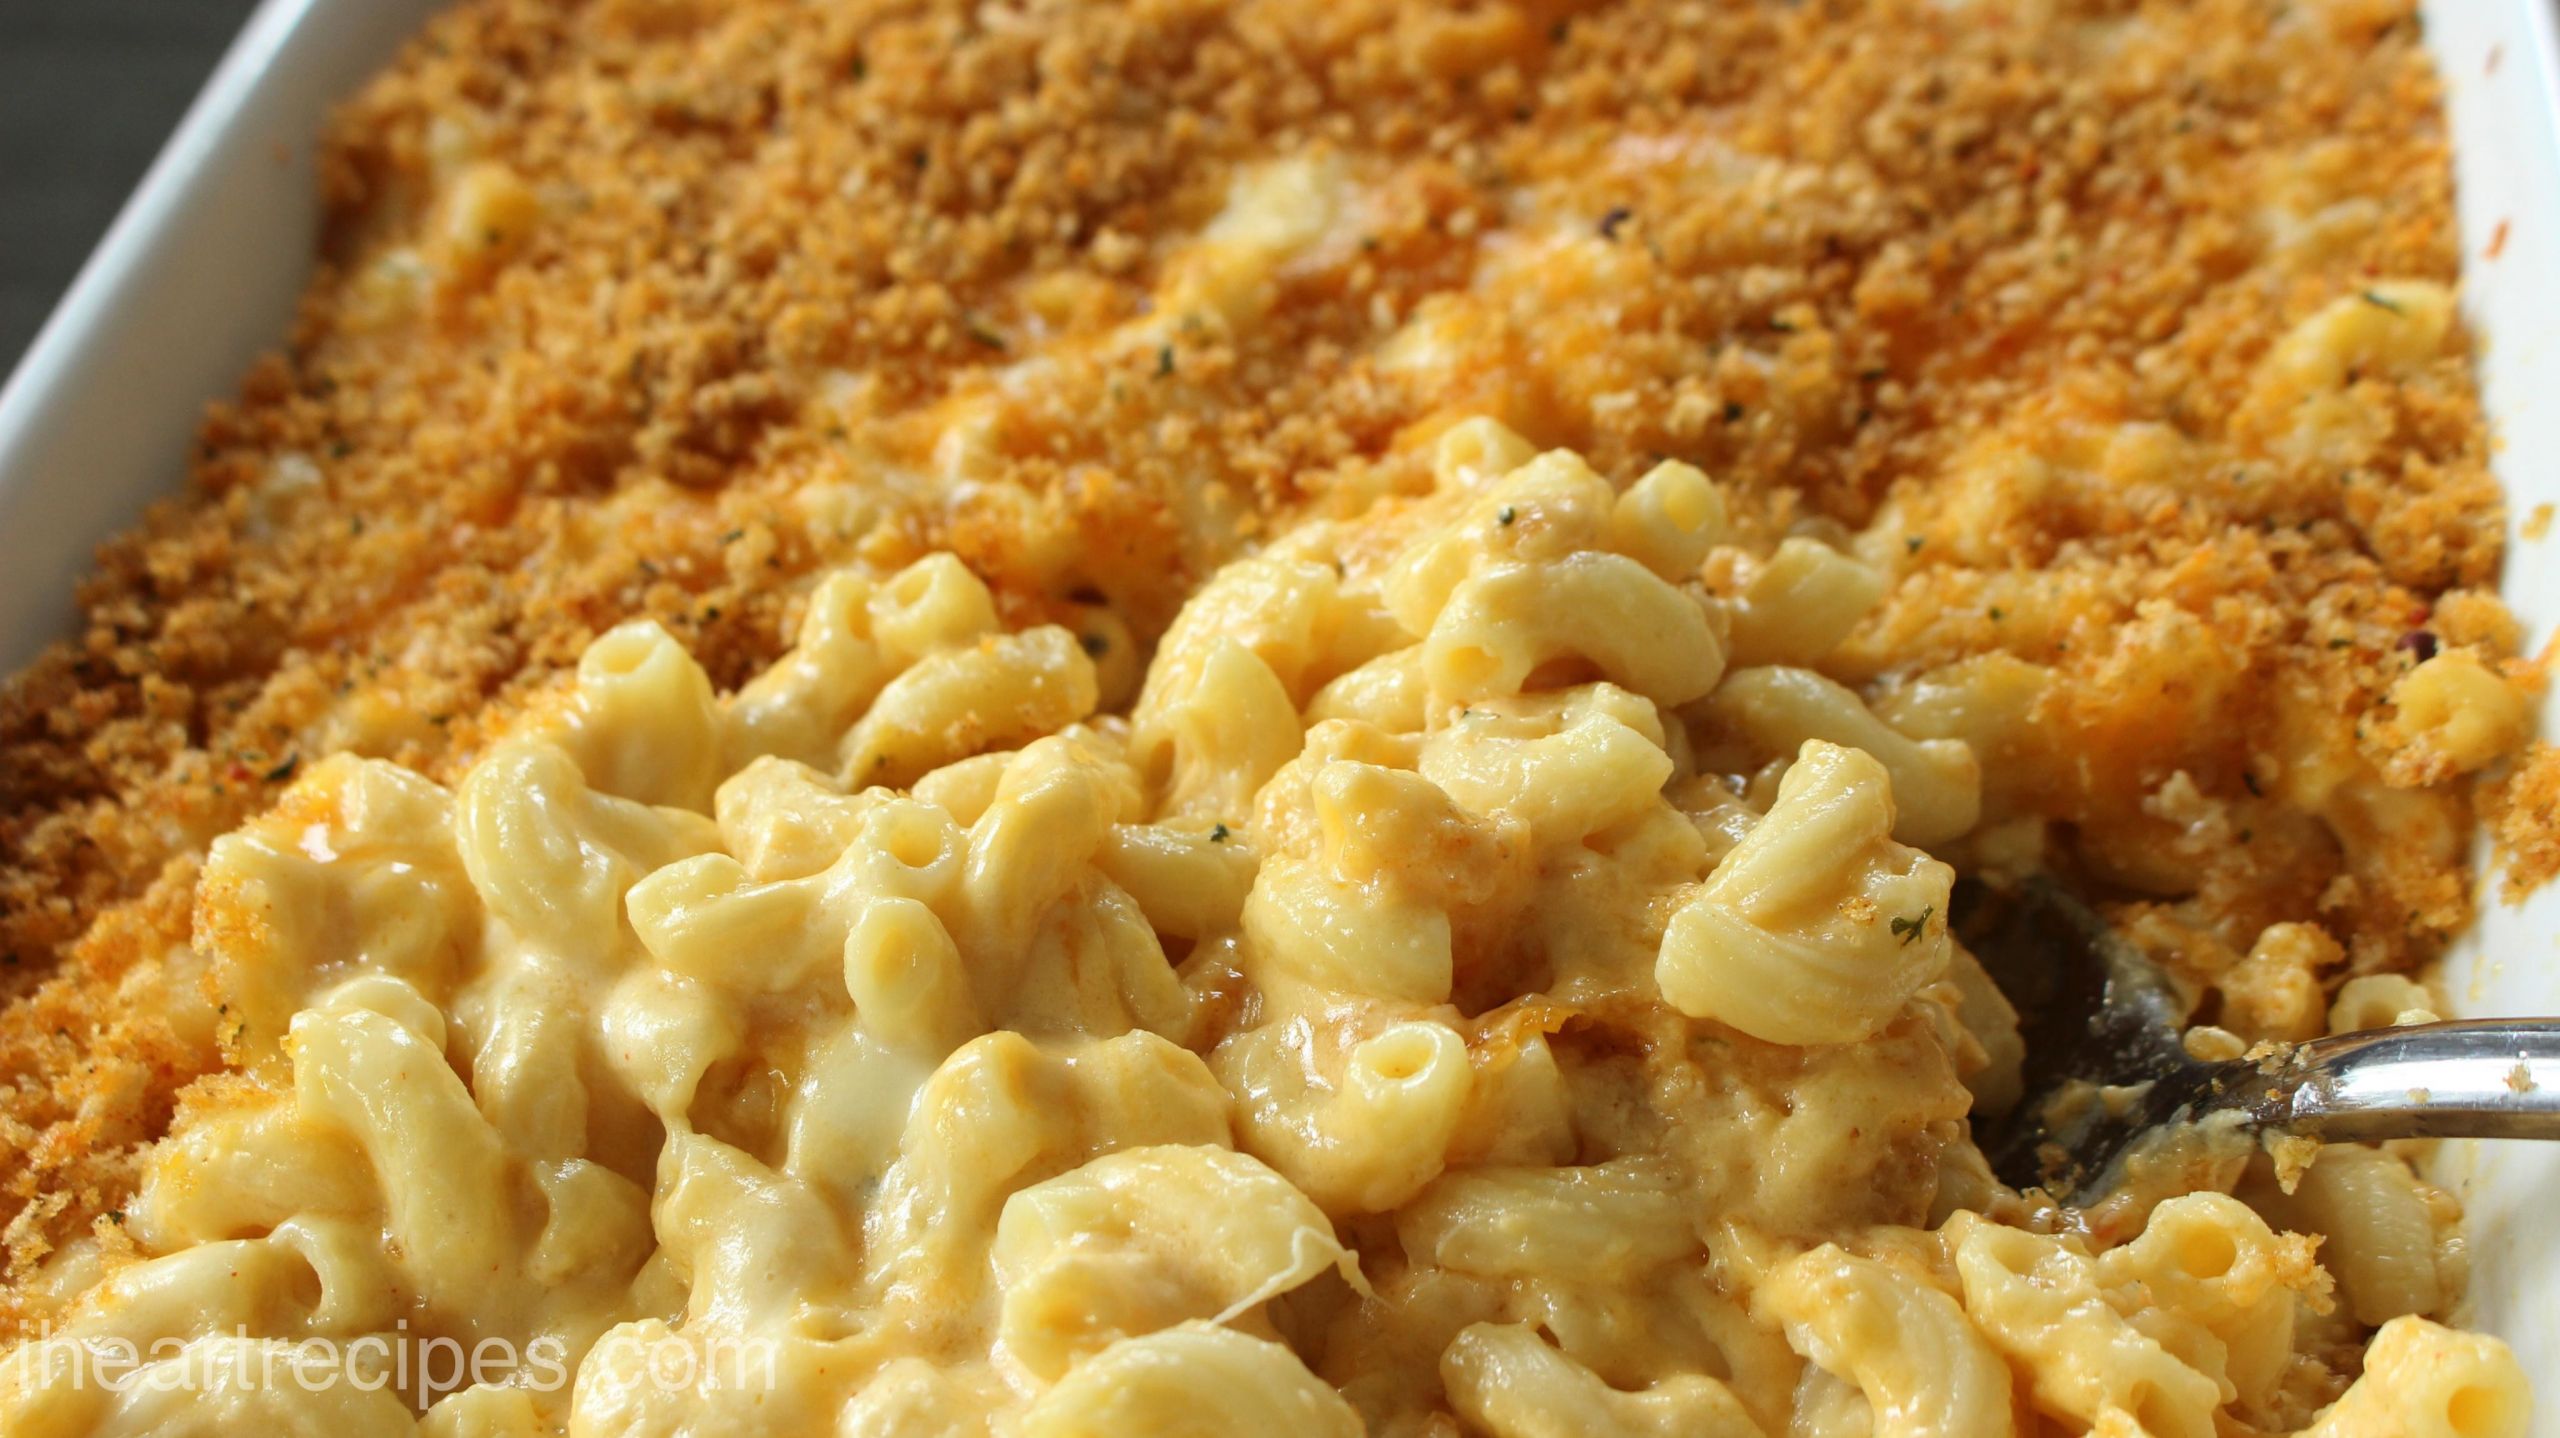 Southern Baked Macaroni And Cheese With Bread Crumbs
 Southern Baked Macaroni and Cheese Casserole Ealith